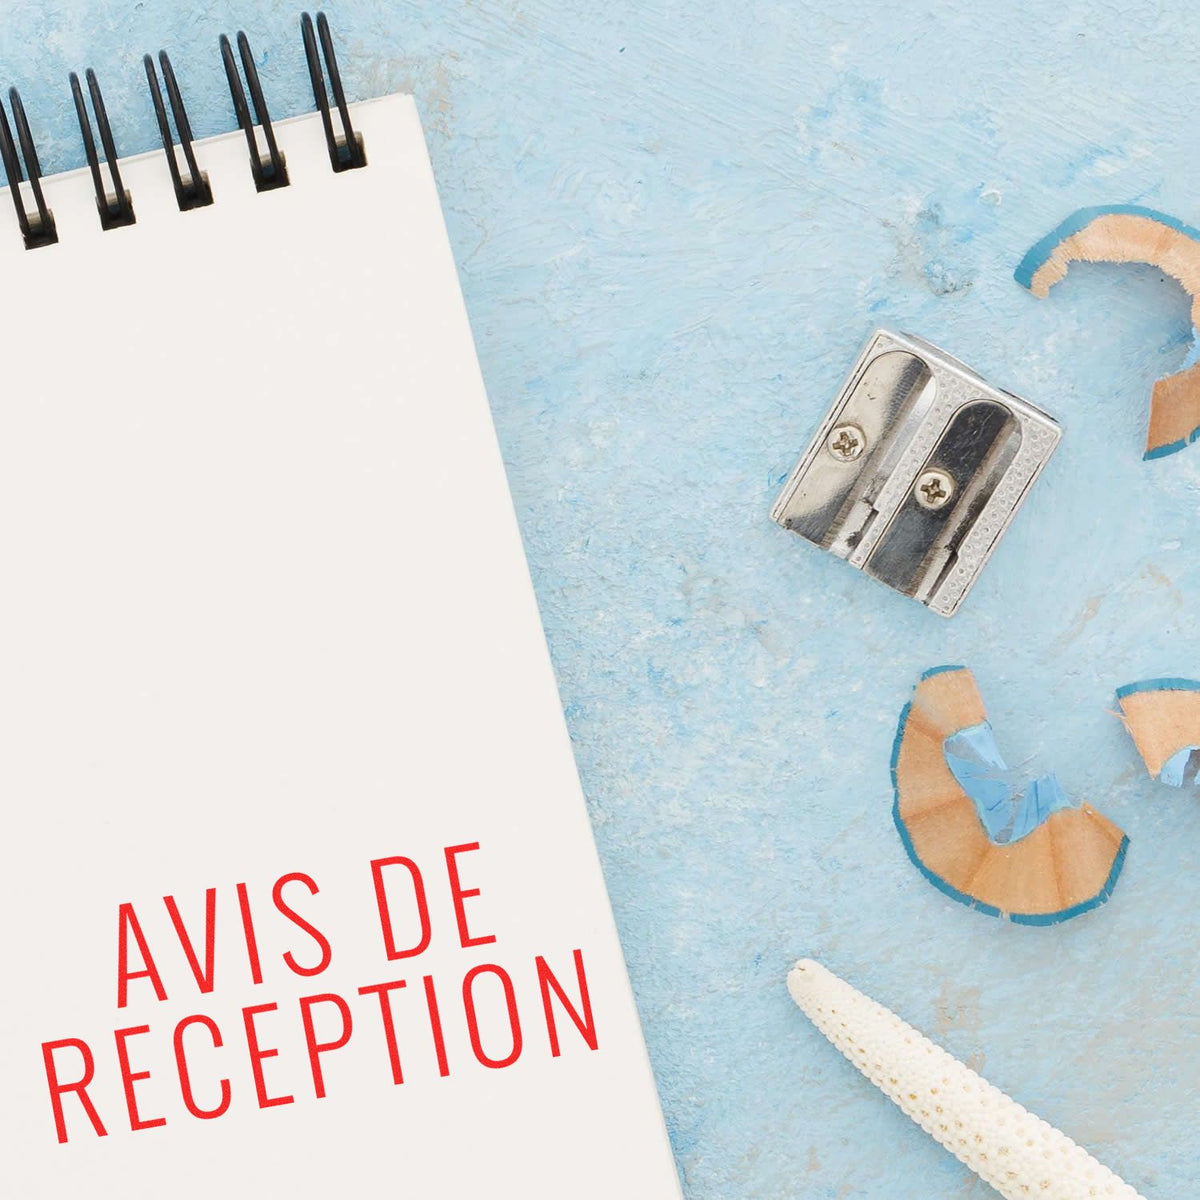 Large Self-Inking Avis De Receiption Stamp In Use Photo